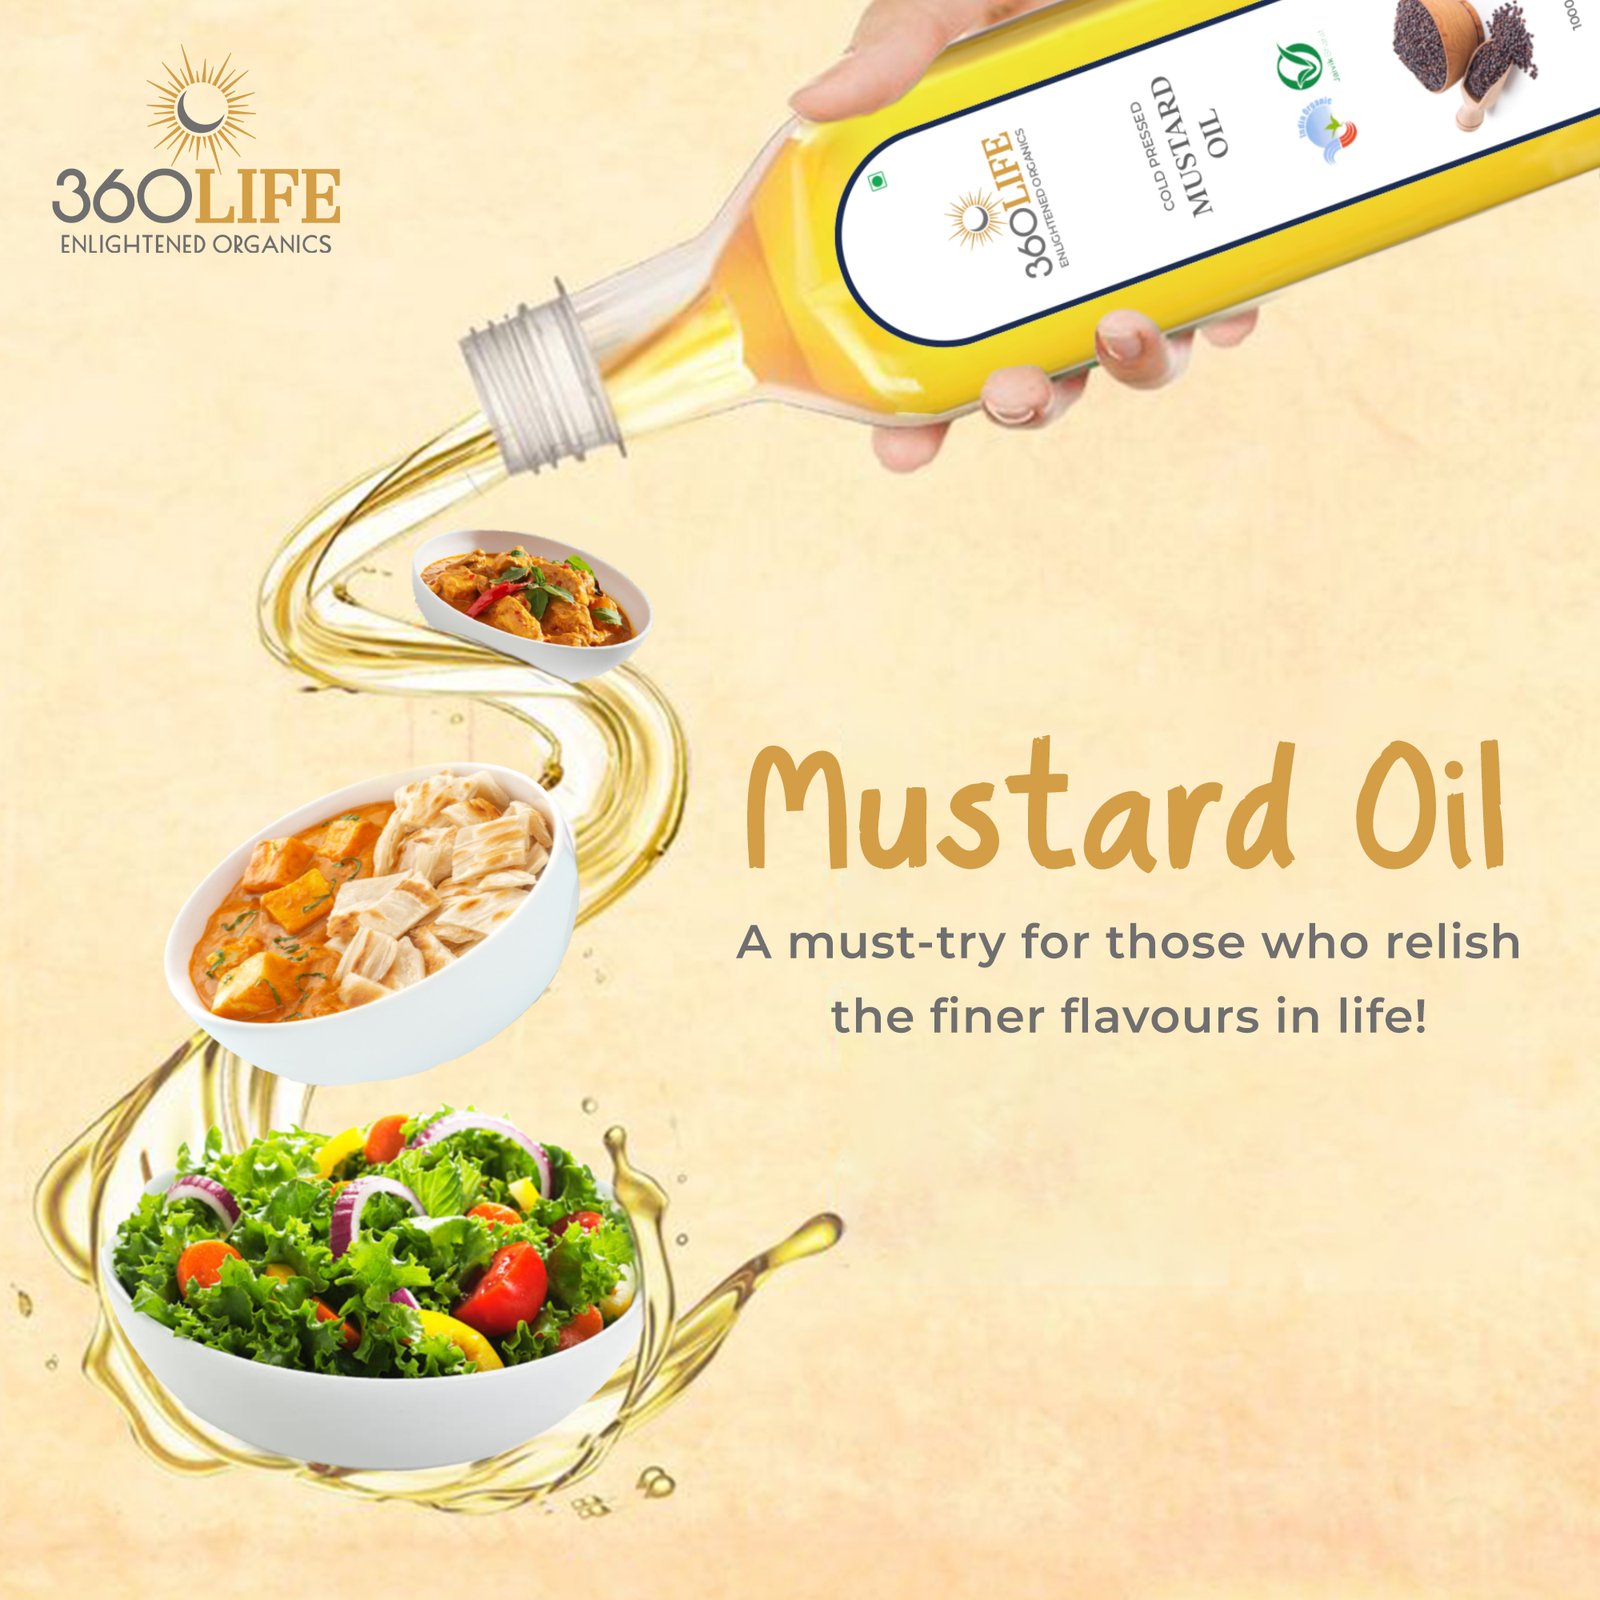 Why Cold-Pressed Mustard Oil Should Be a Staple in Your Kitchen